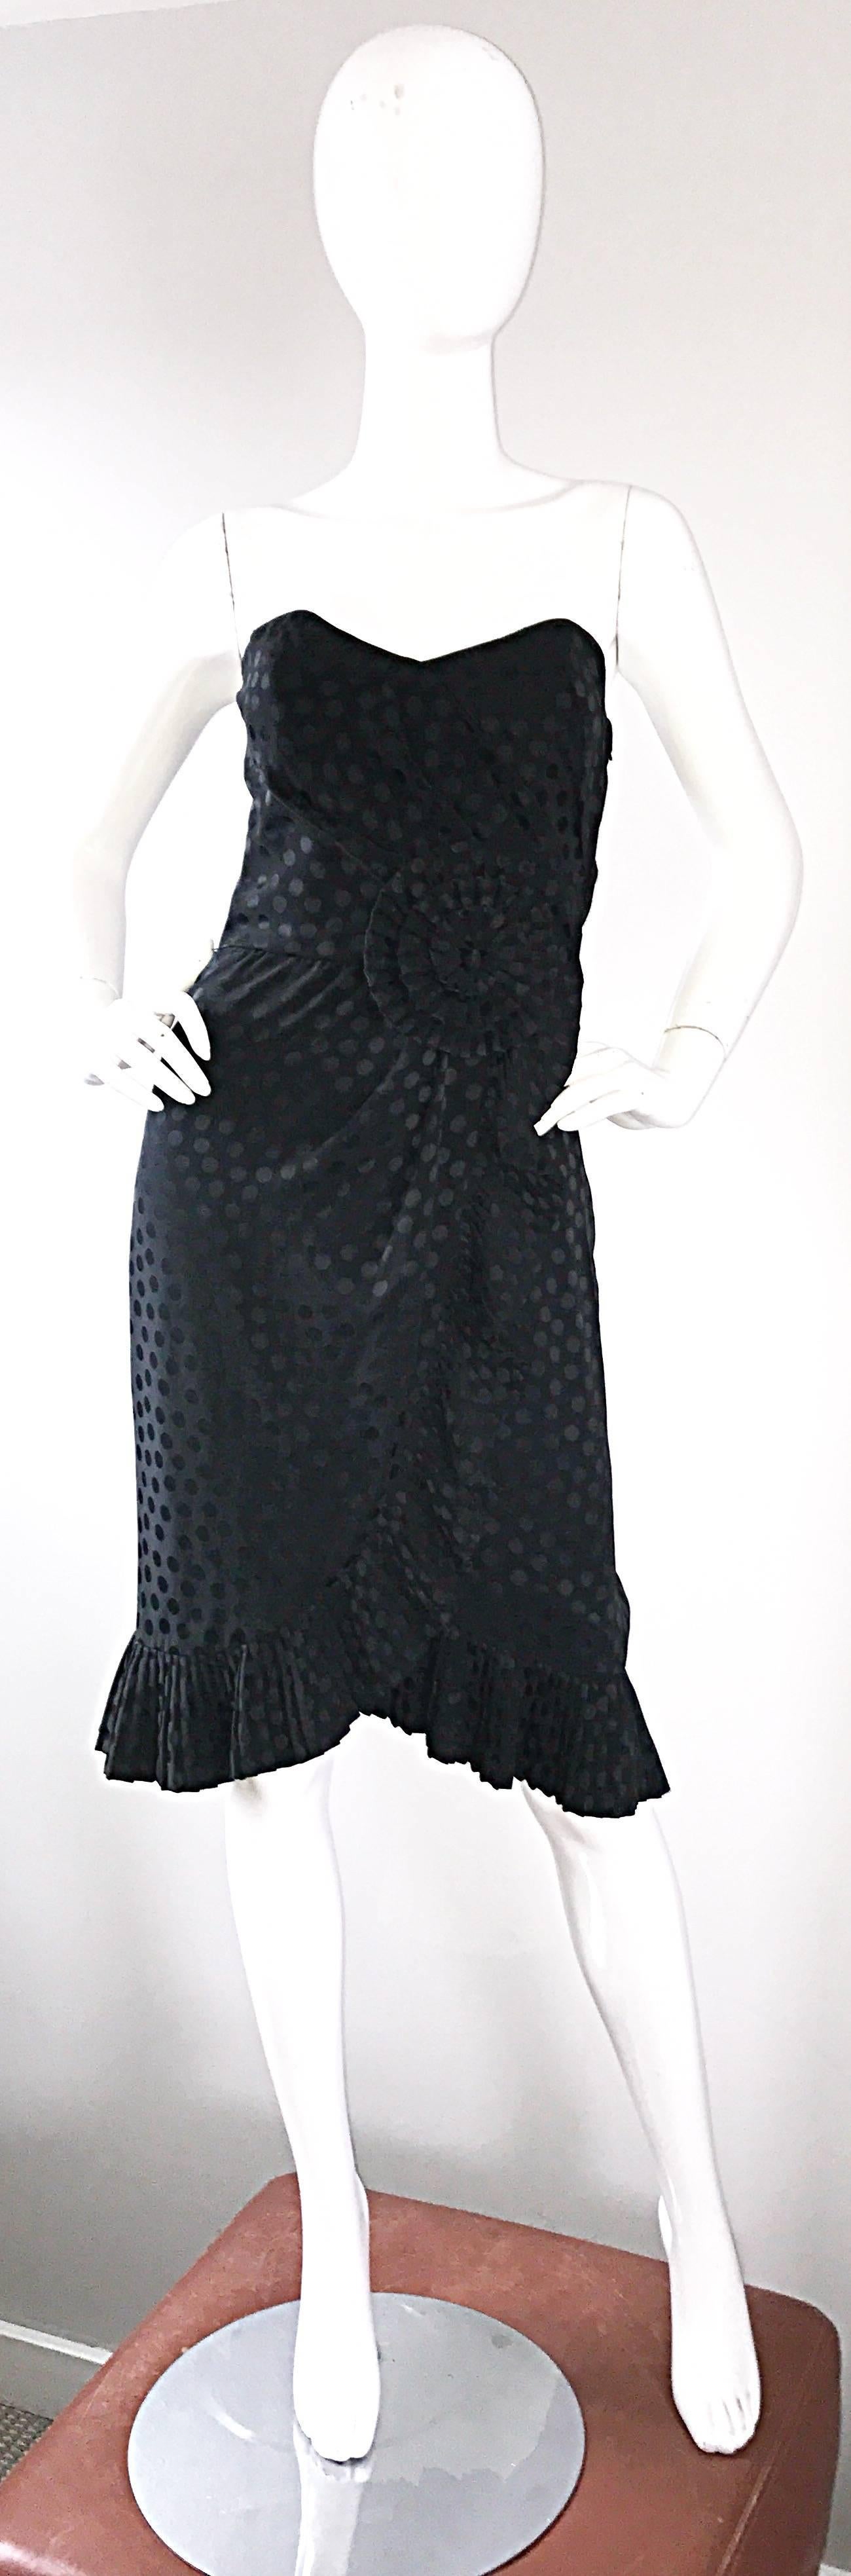 Chic vintage ALBERT NIPON 90s black strapless silk dress! Features black polka dots throughout, origami pleated side waist detail, and a pleated hem. Such a a flattering little black dress, with so much attention to detail. Interior boning and